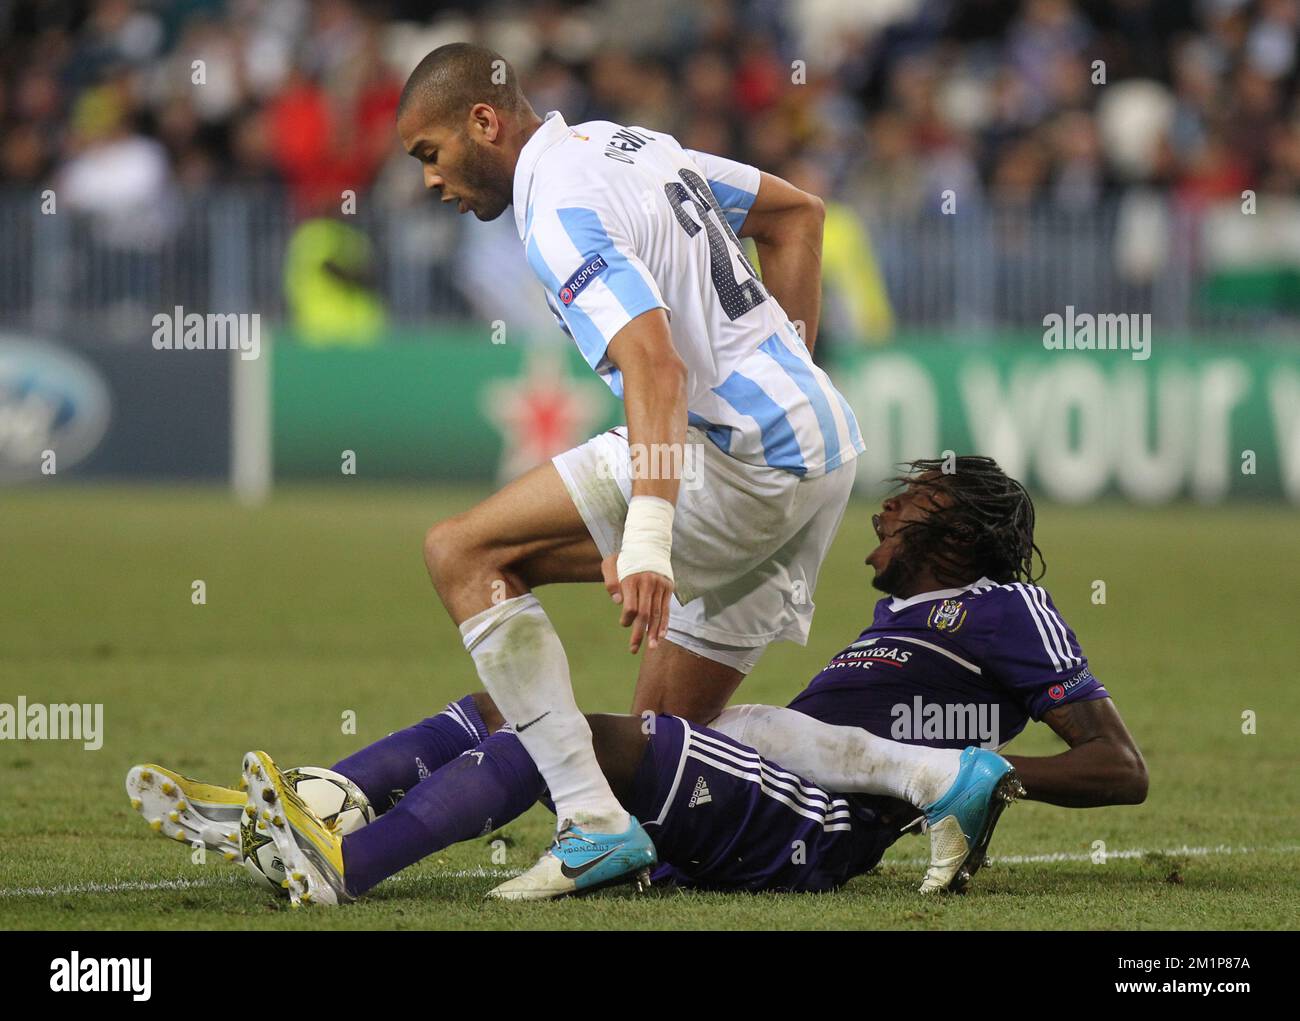 20121204 - BRUSSELS, SPAIN: Malaga's defender Oguchi Onyewu and Anderlecht's Dieumerci Mbokani fight for the ball during the match between Spanish club Malaga CF and Anderlecht, in the group stage (group C) of the UEFA Champions League tournament, in Malaga, Tuesday 04 December 2012. BELGA PHOTO VIRGINIE LEFOUR Stock Photo